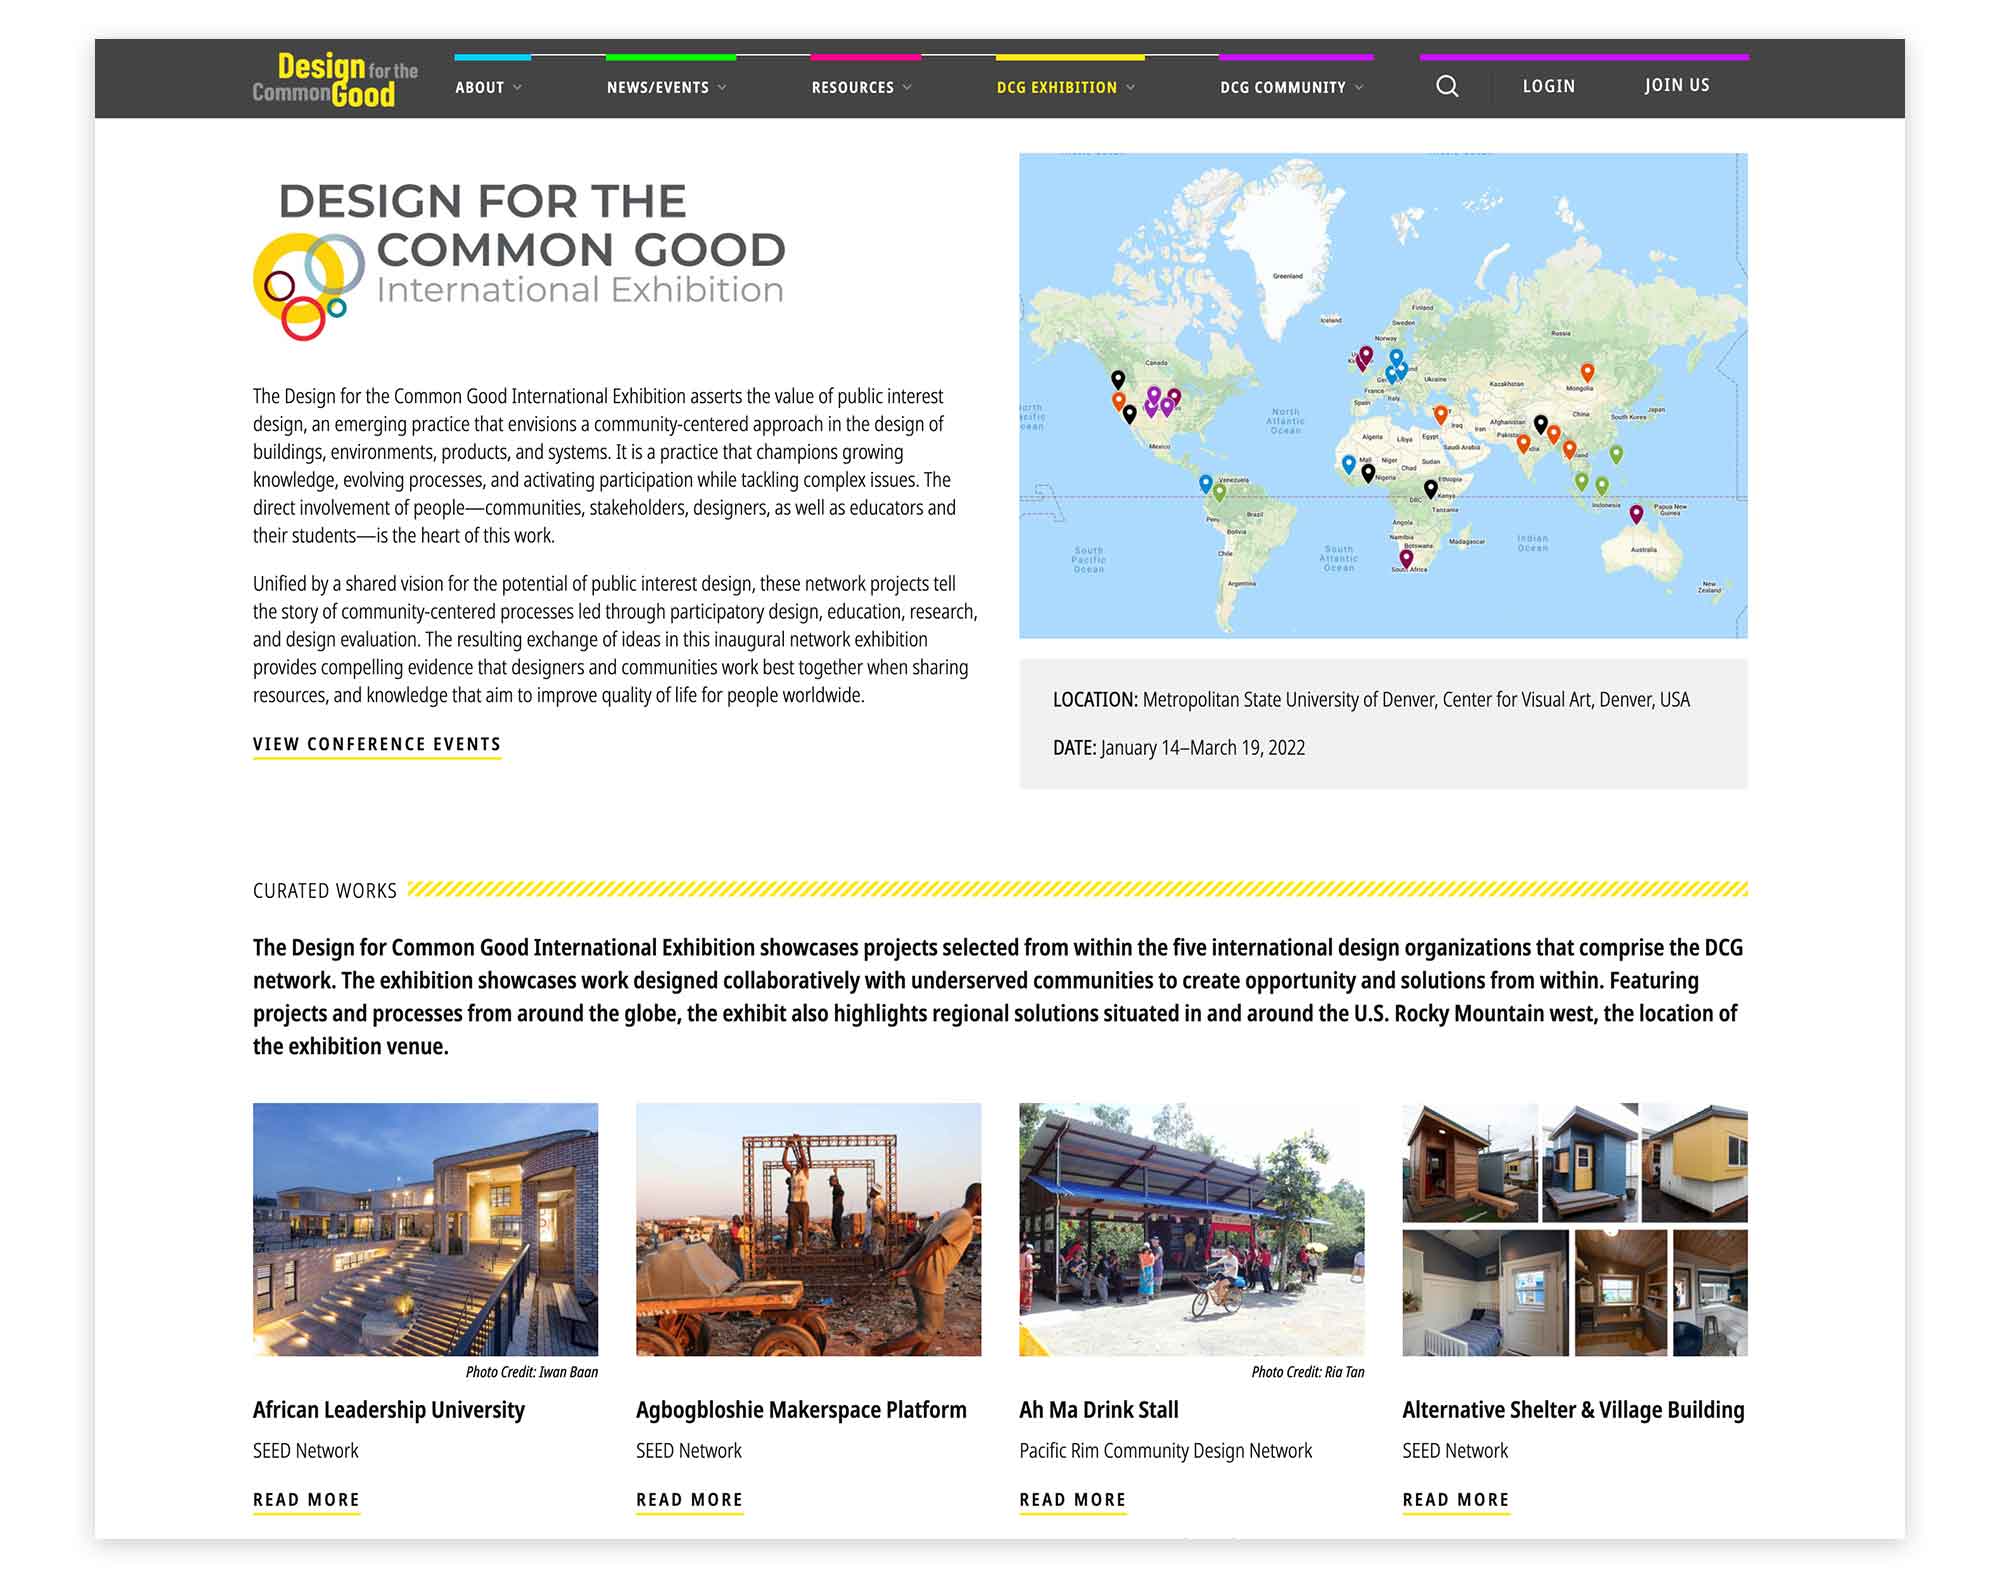 Design for the Common Good Exhibition and Conference Page